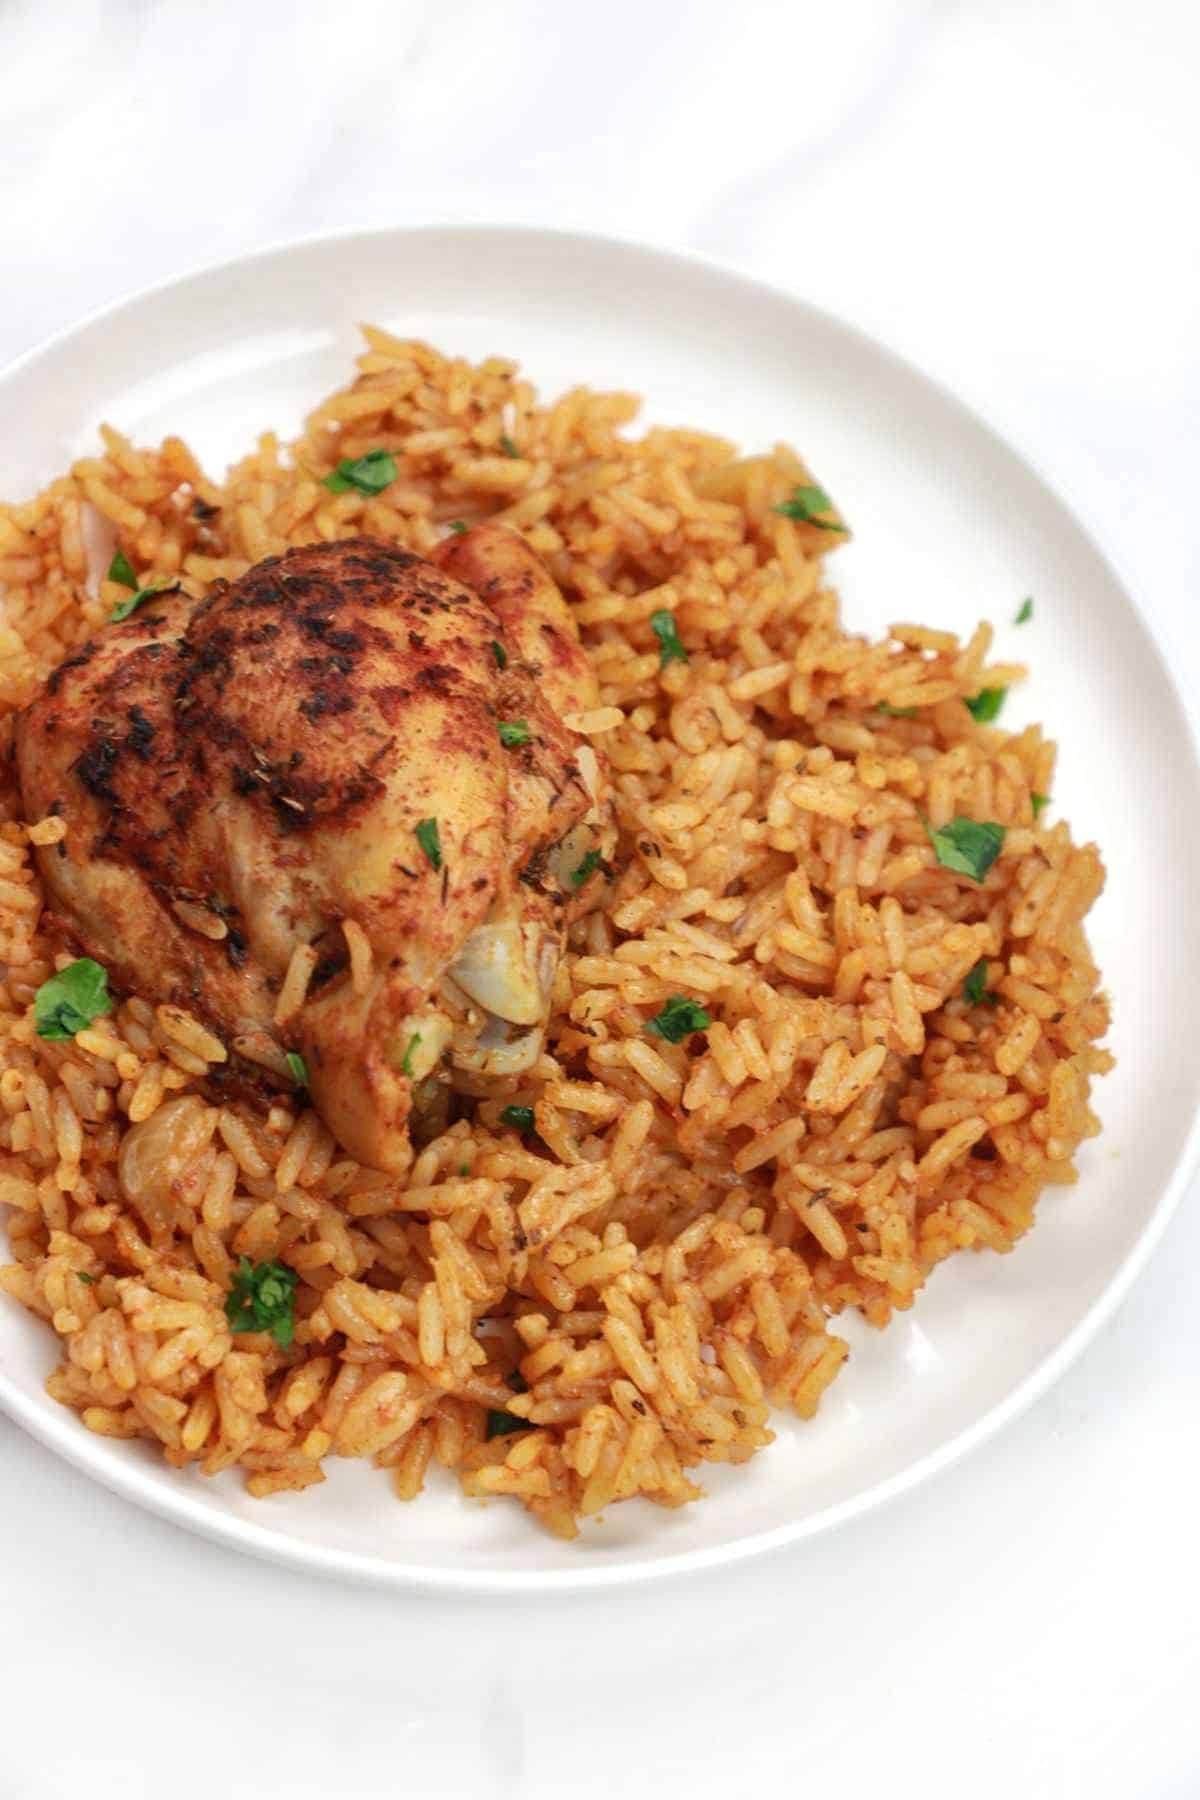 rice and chicken served on a white plate.